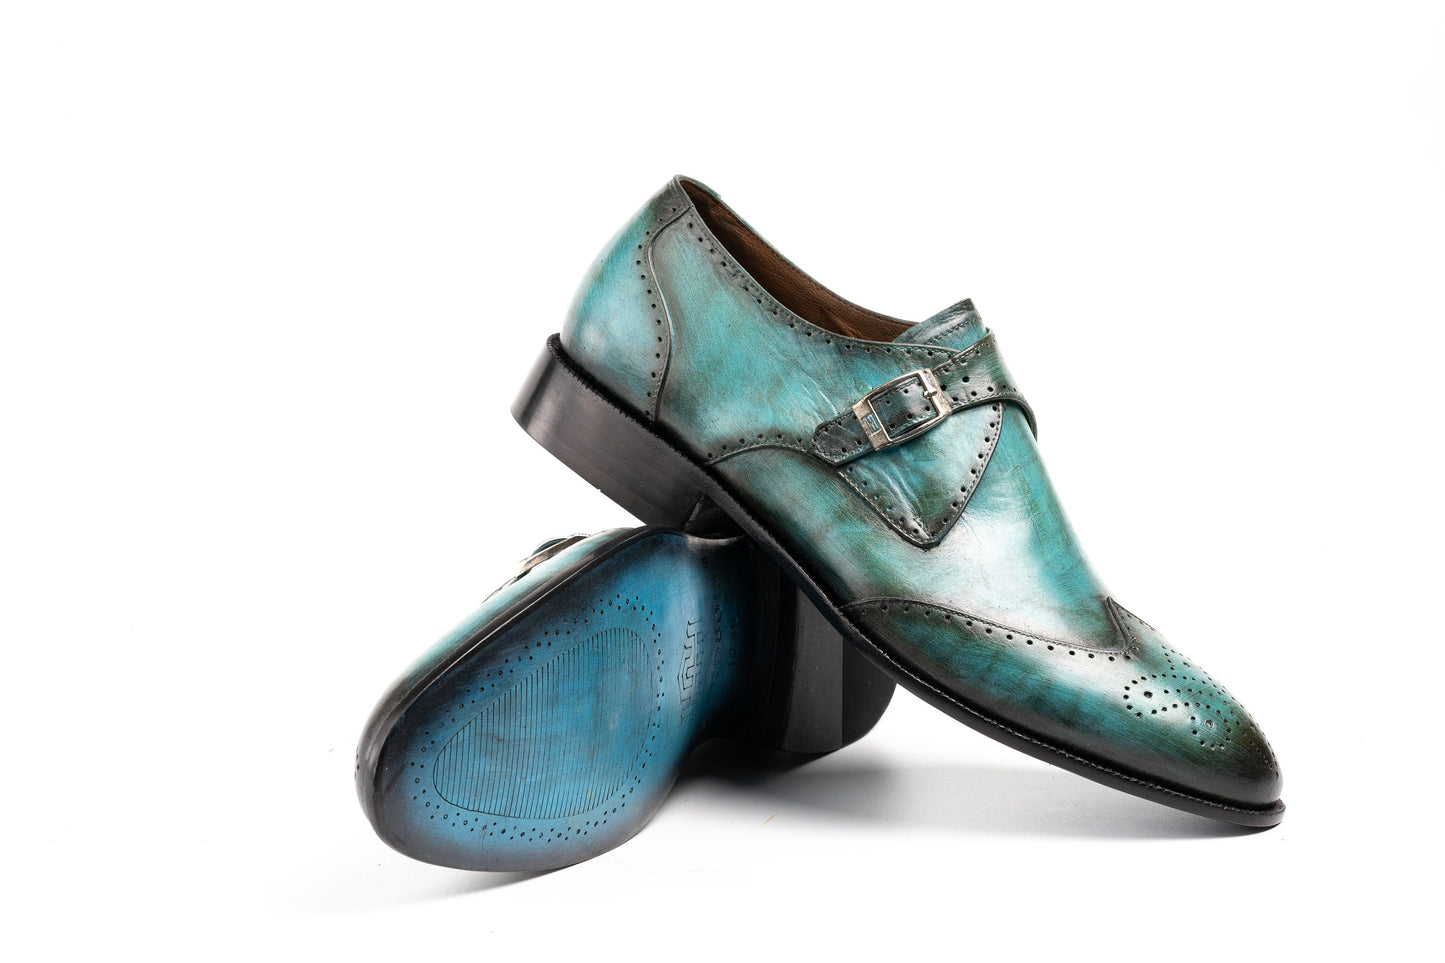 Turquoise Colored Single buckle Wingtip Monk Strap Patina Shoes Made using Crust Leather with Hand Dye Finish Woozy Store